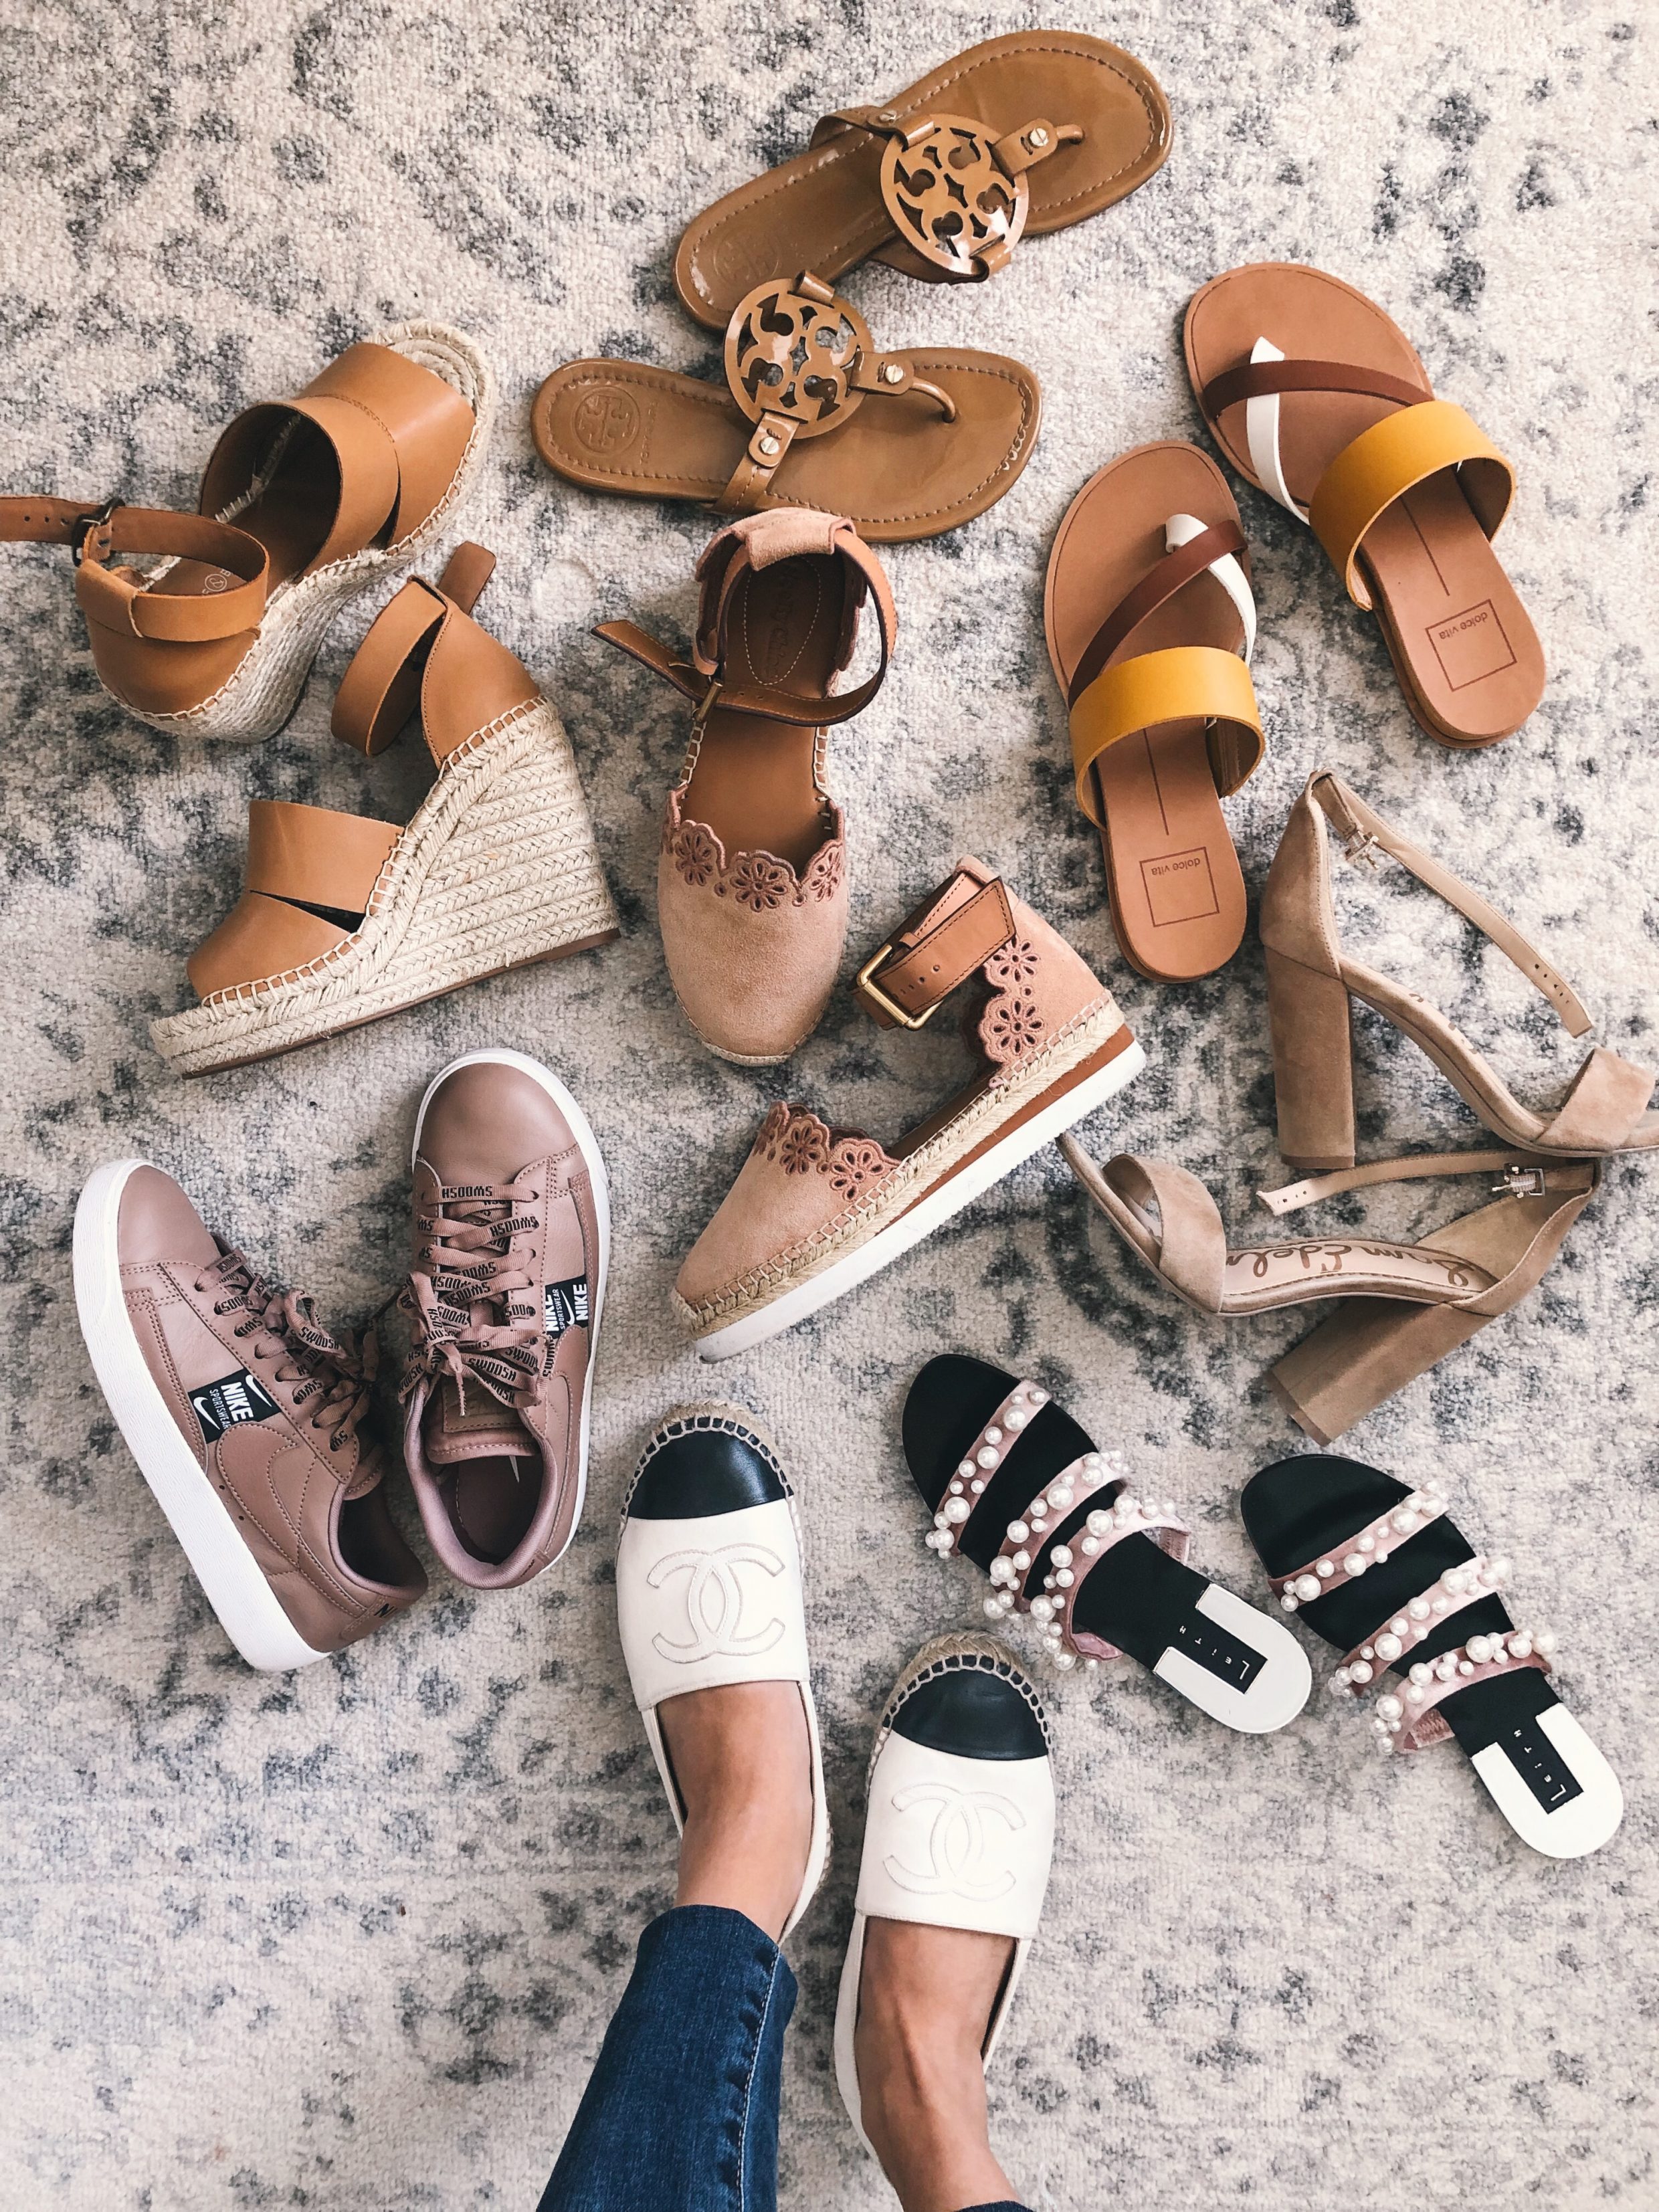 Best Shoes for Spring and Summer 2019 